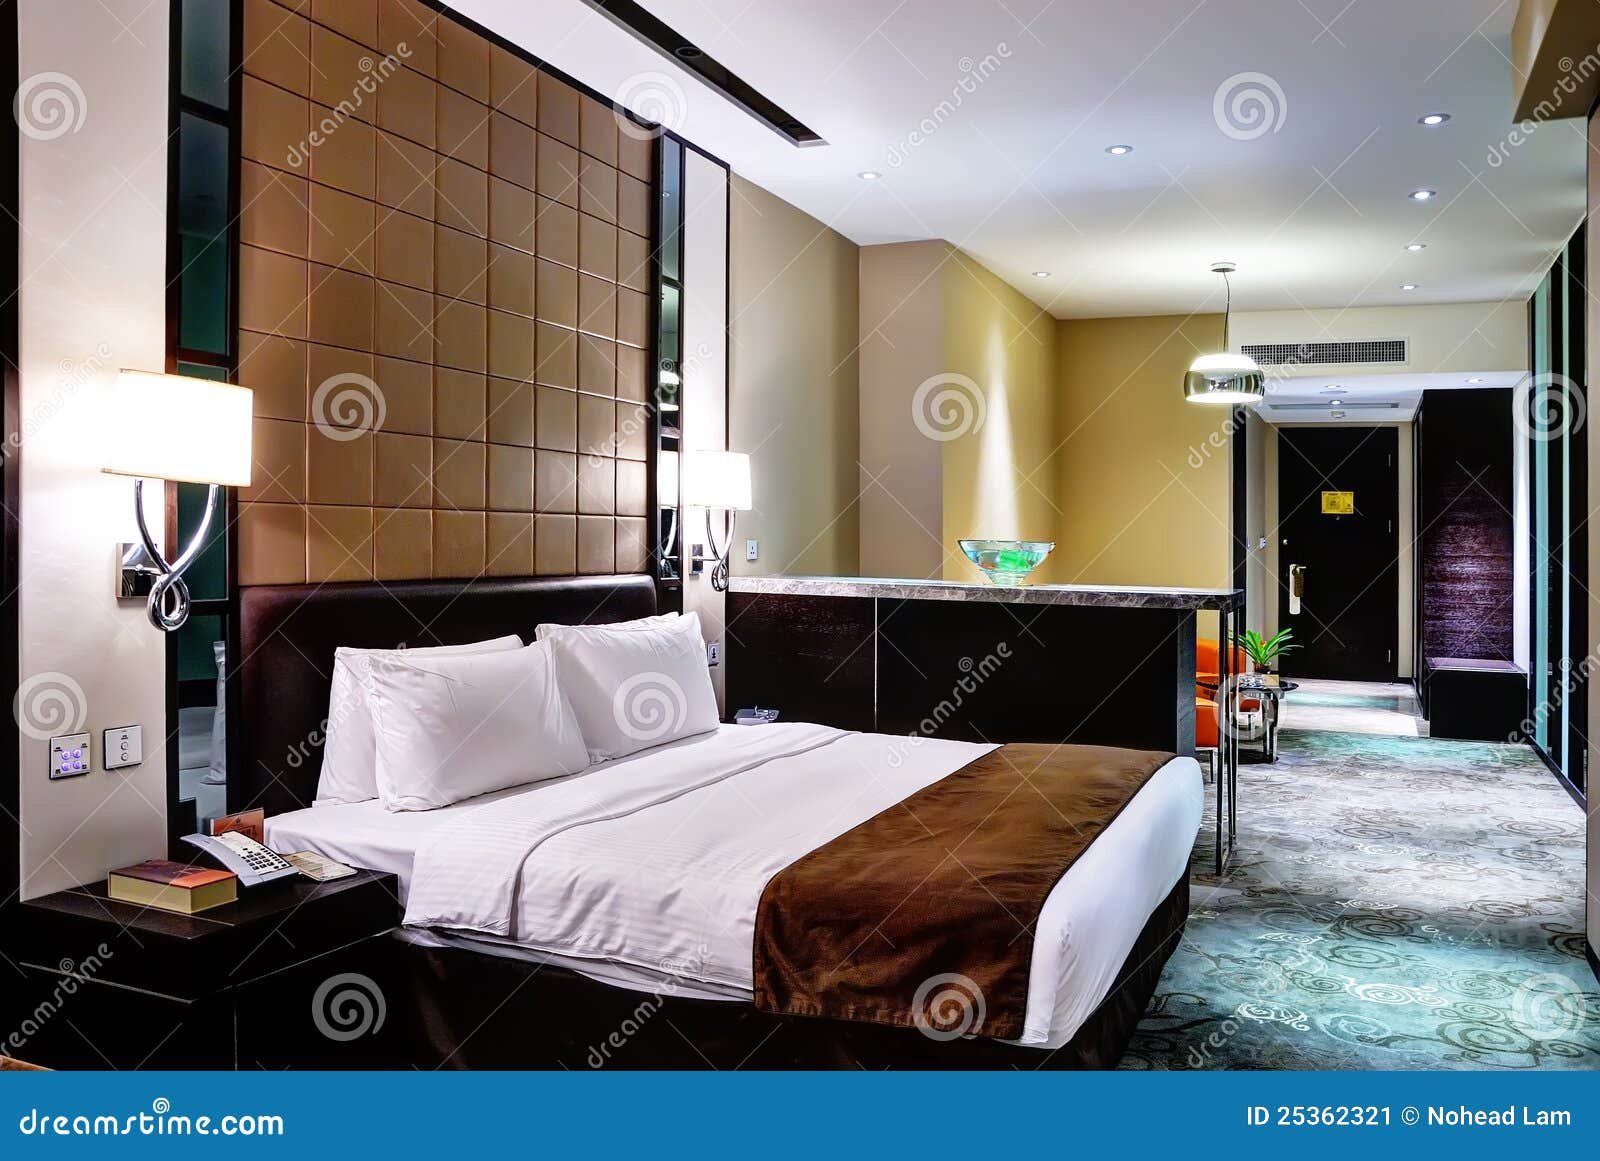 Hotel room stock image. Image of bedding, bedroom, home - 25362321